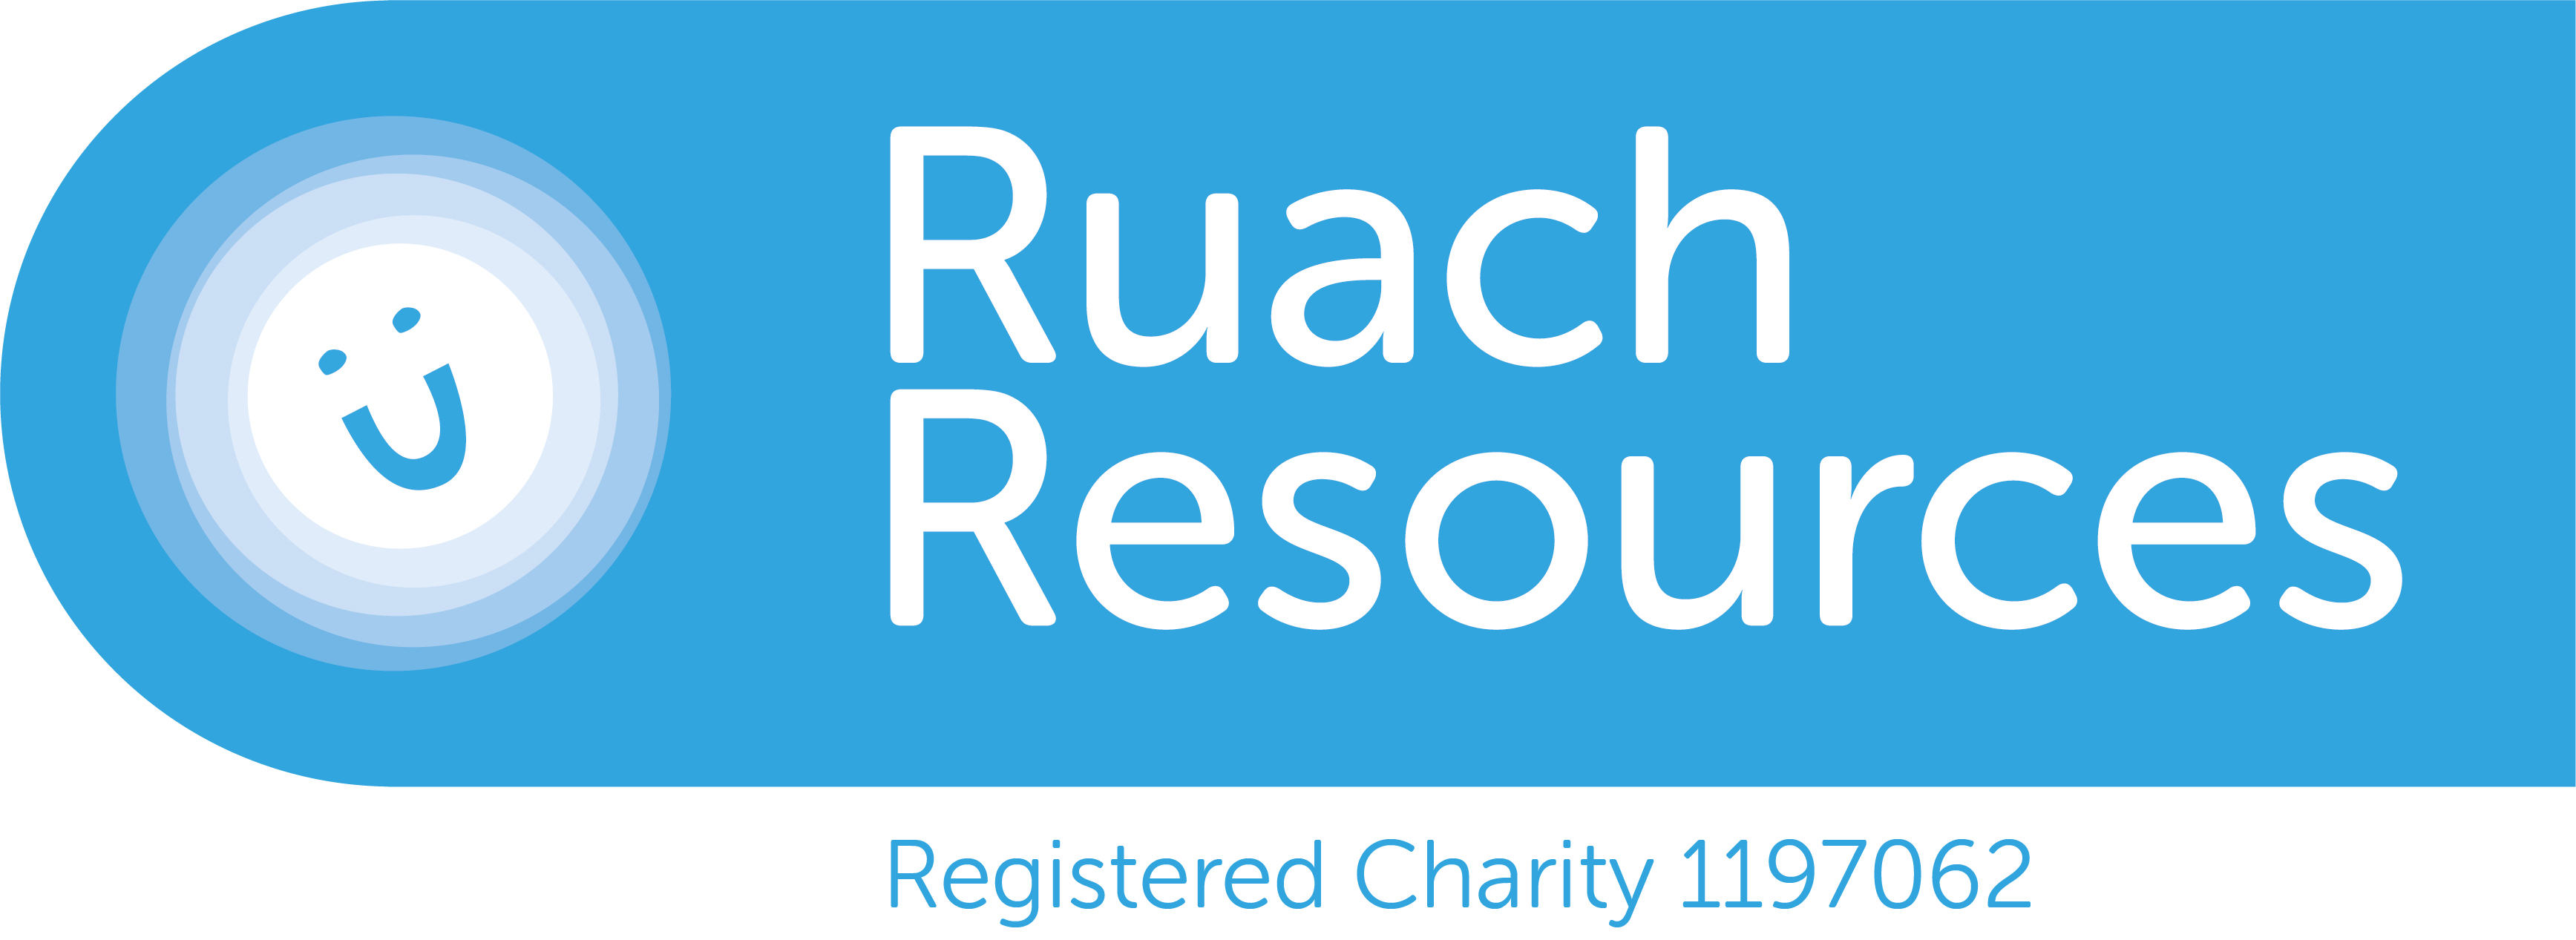 Visit Ruach Resources's stand